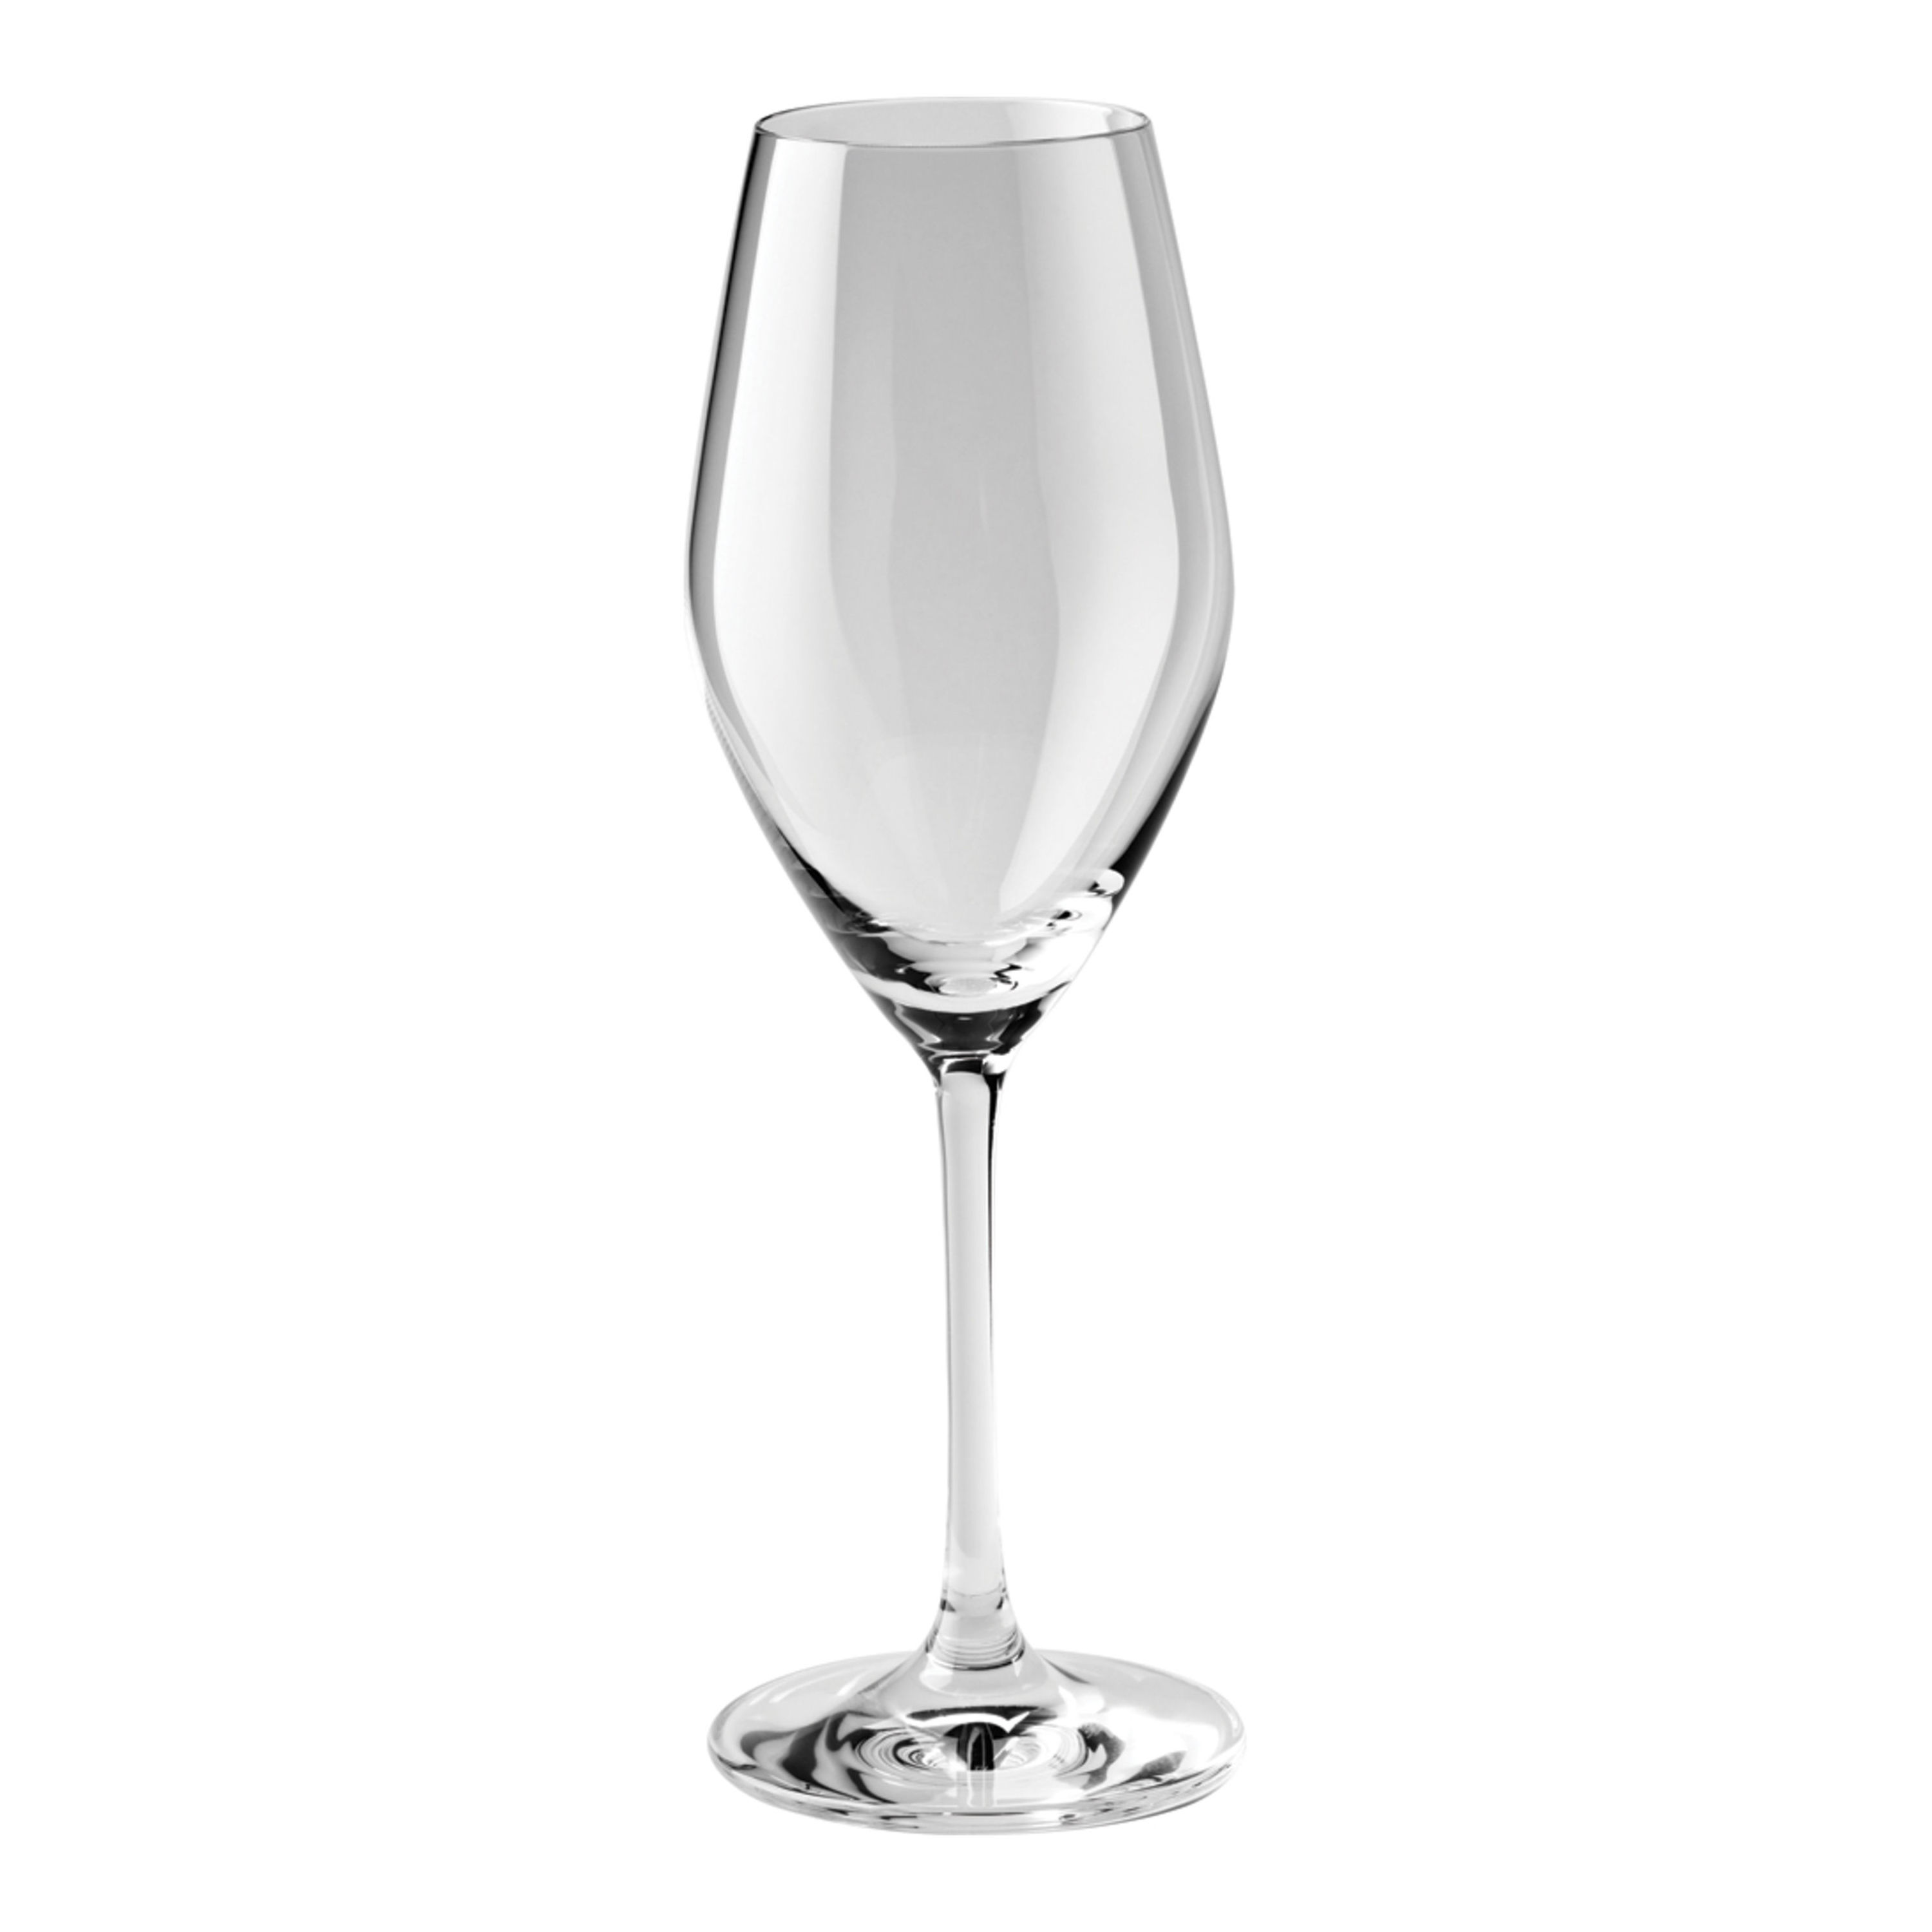 9.5 oz perfection stemless Flute glass MADE IN USA [H4870] : Splendids  Dinnerware, Wholesale Dinnerware and Glassware for Restaurant and Home